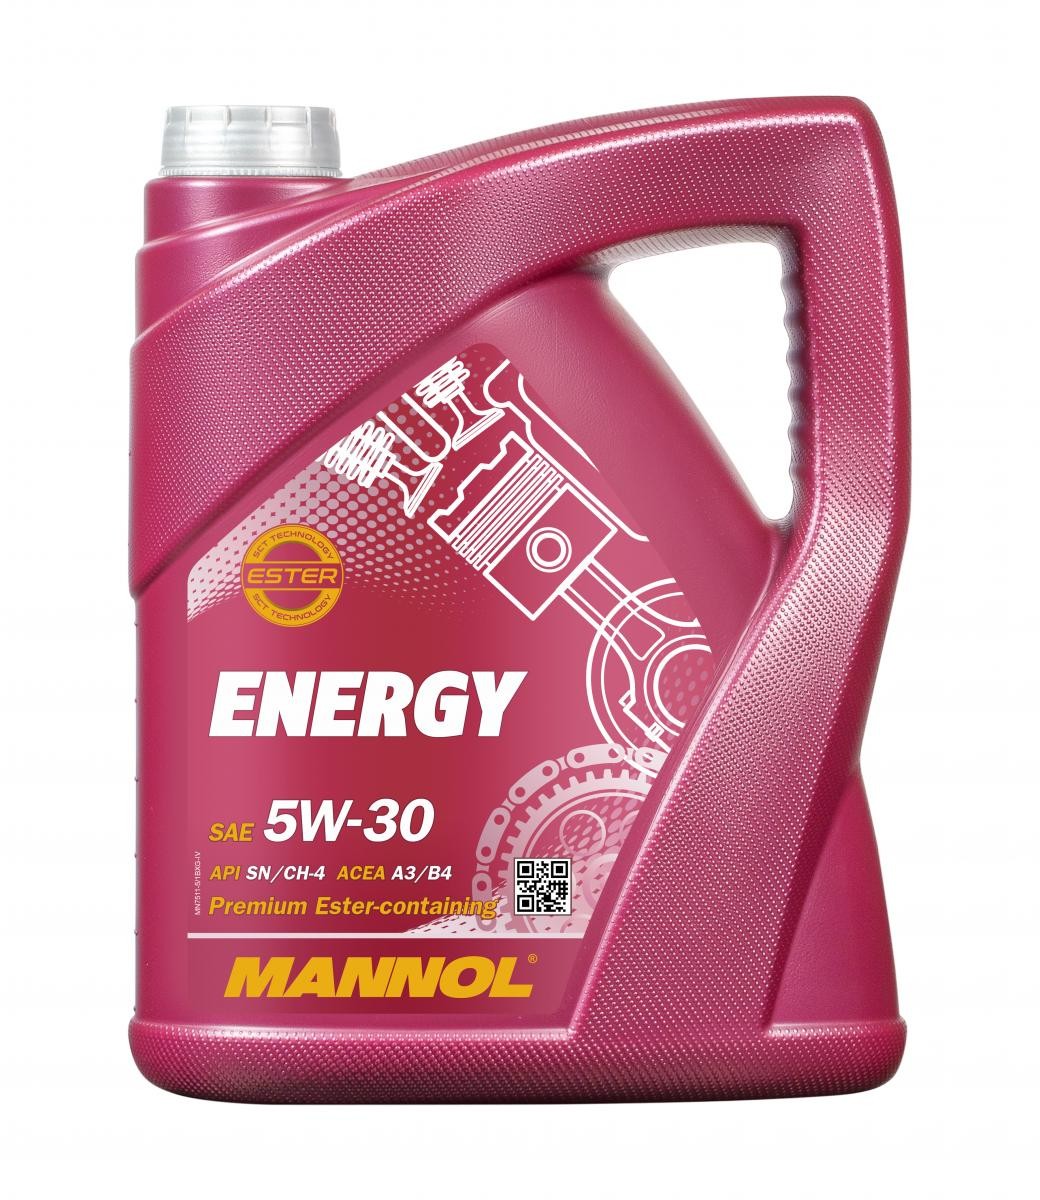 MANNOL ENERGY MN7511-5 Engine oil 5W-30, 5l, Part Synthetic Oil